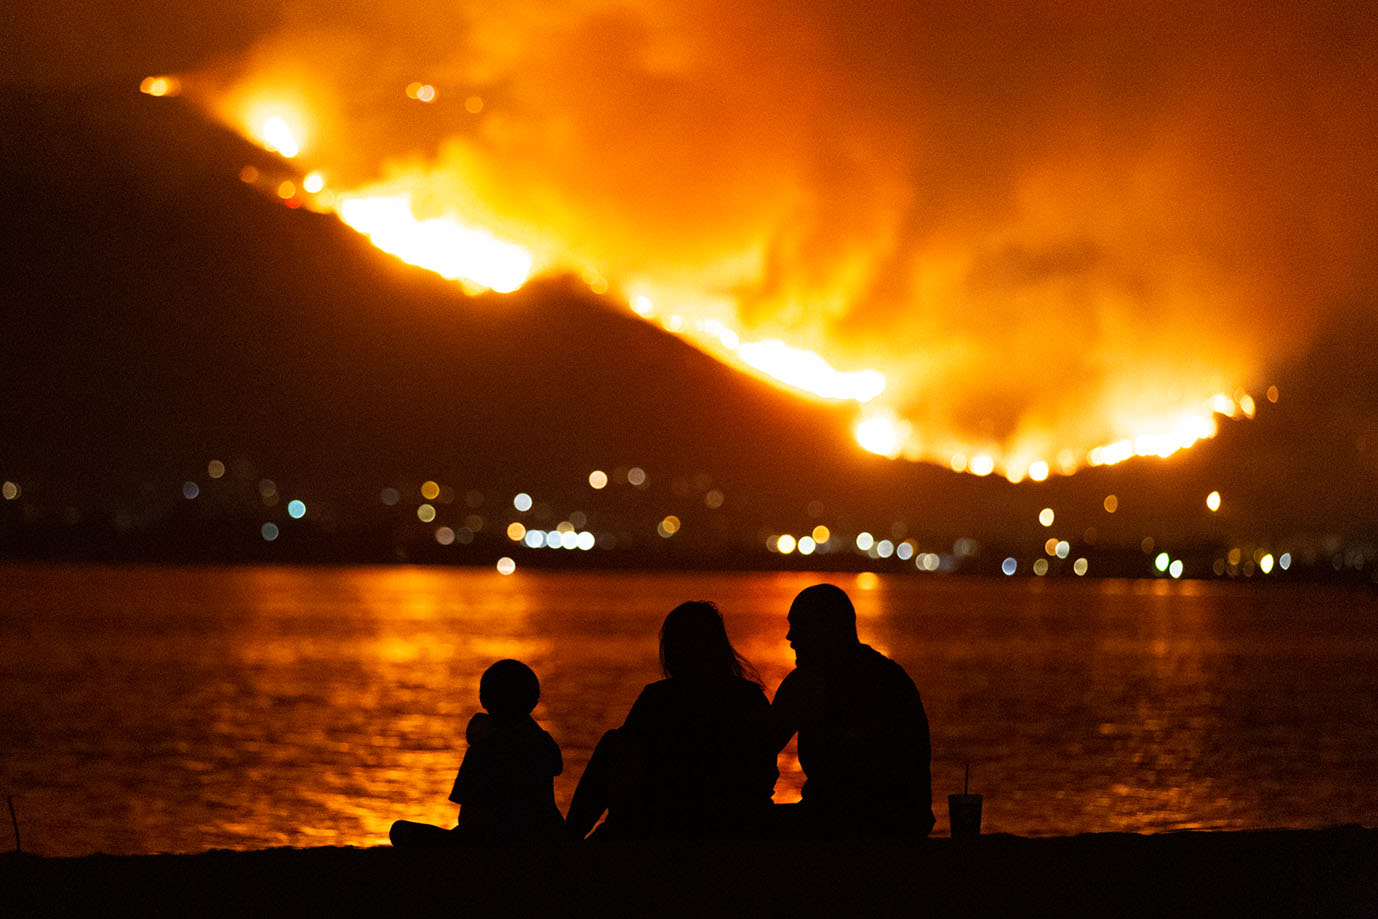 people sitting by a lake looking at mountains on fire at night